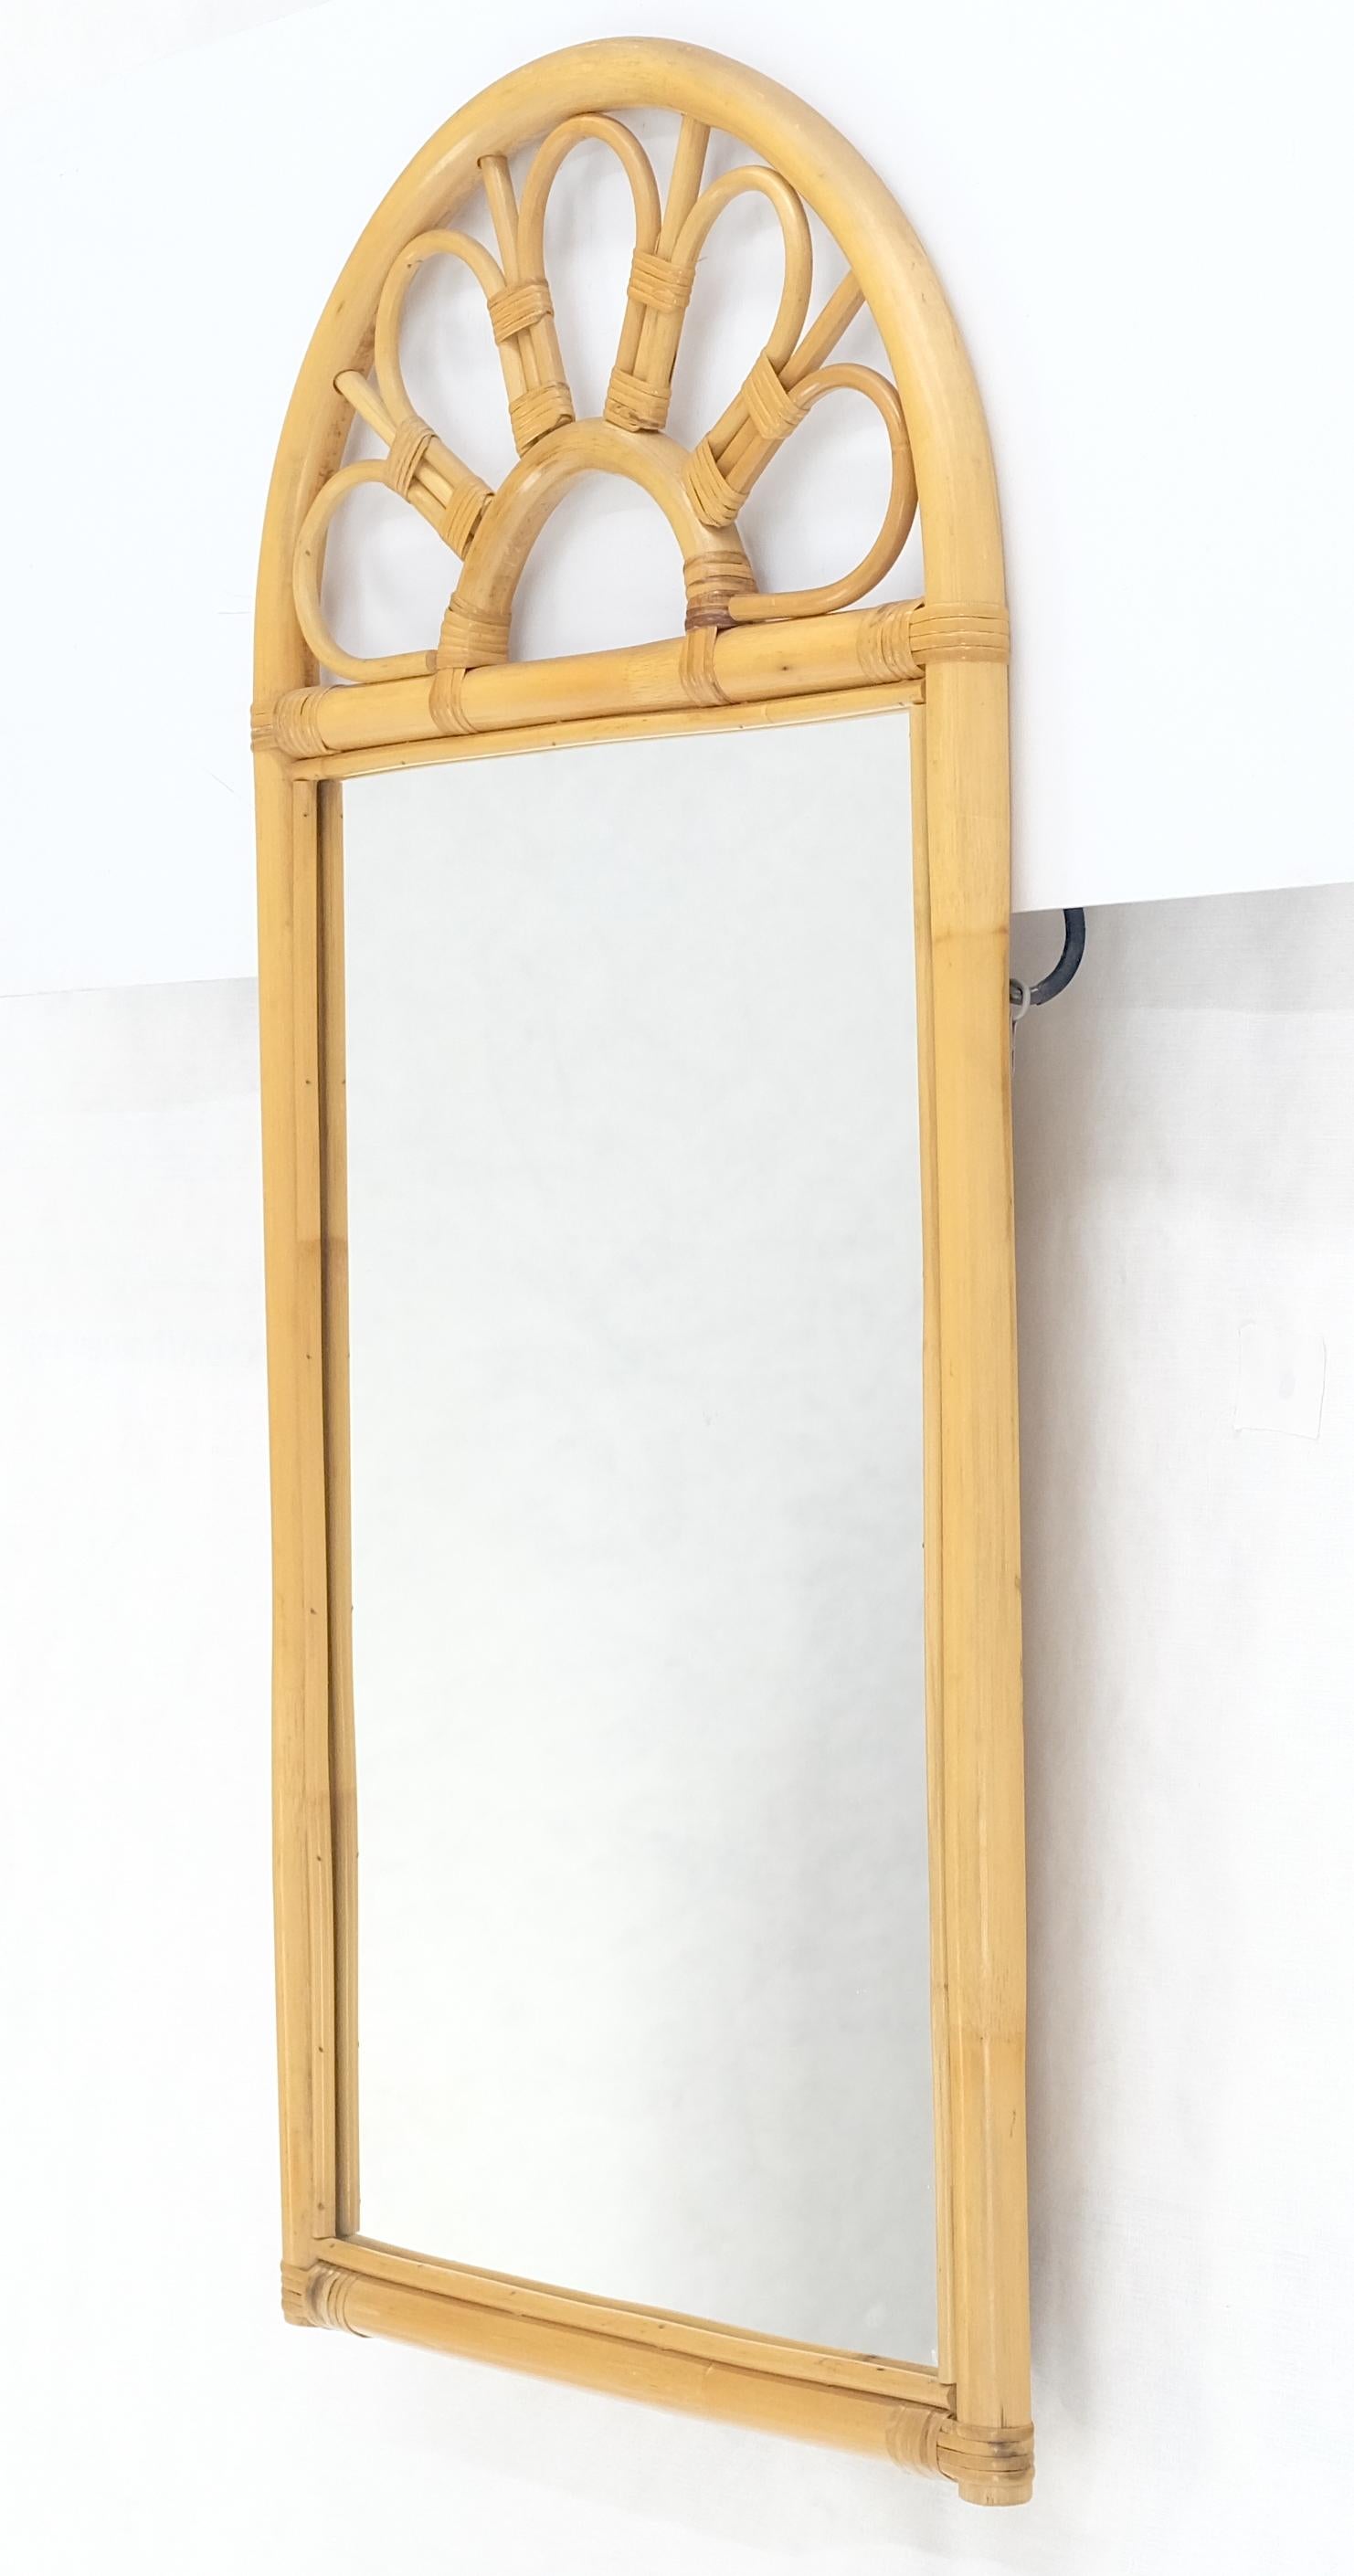 American Blond Bamboo Ratan Dome Top Shape Mid Century Modern Wall Mirror MINT! For Sale